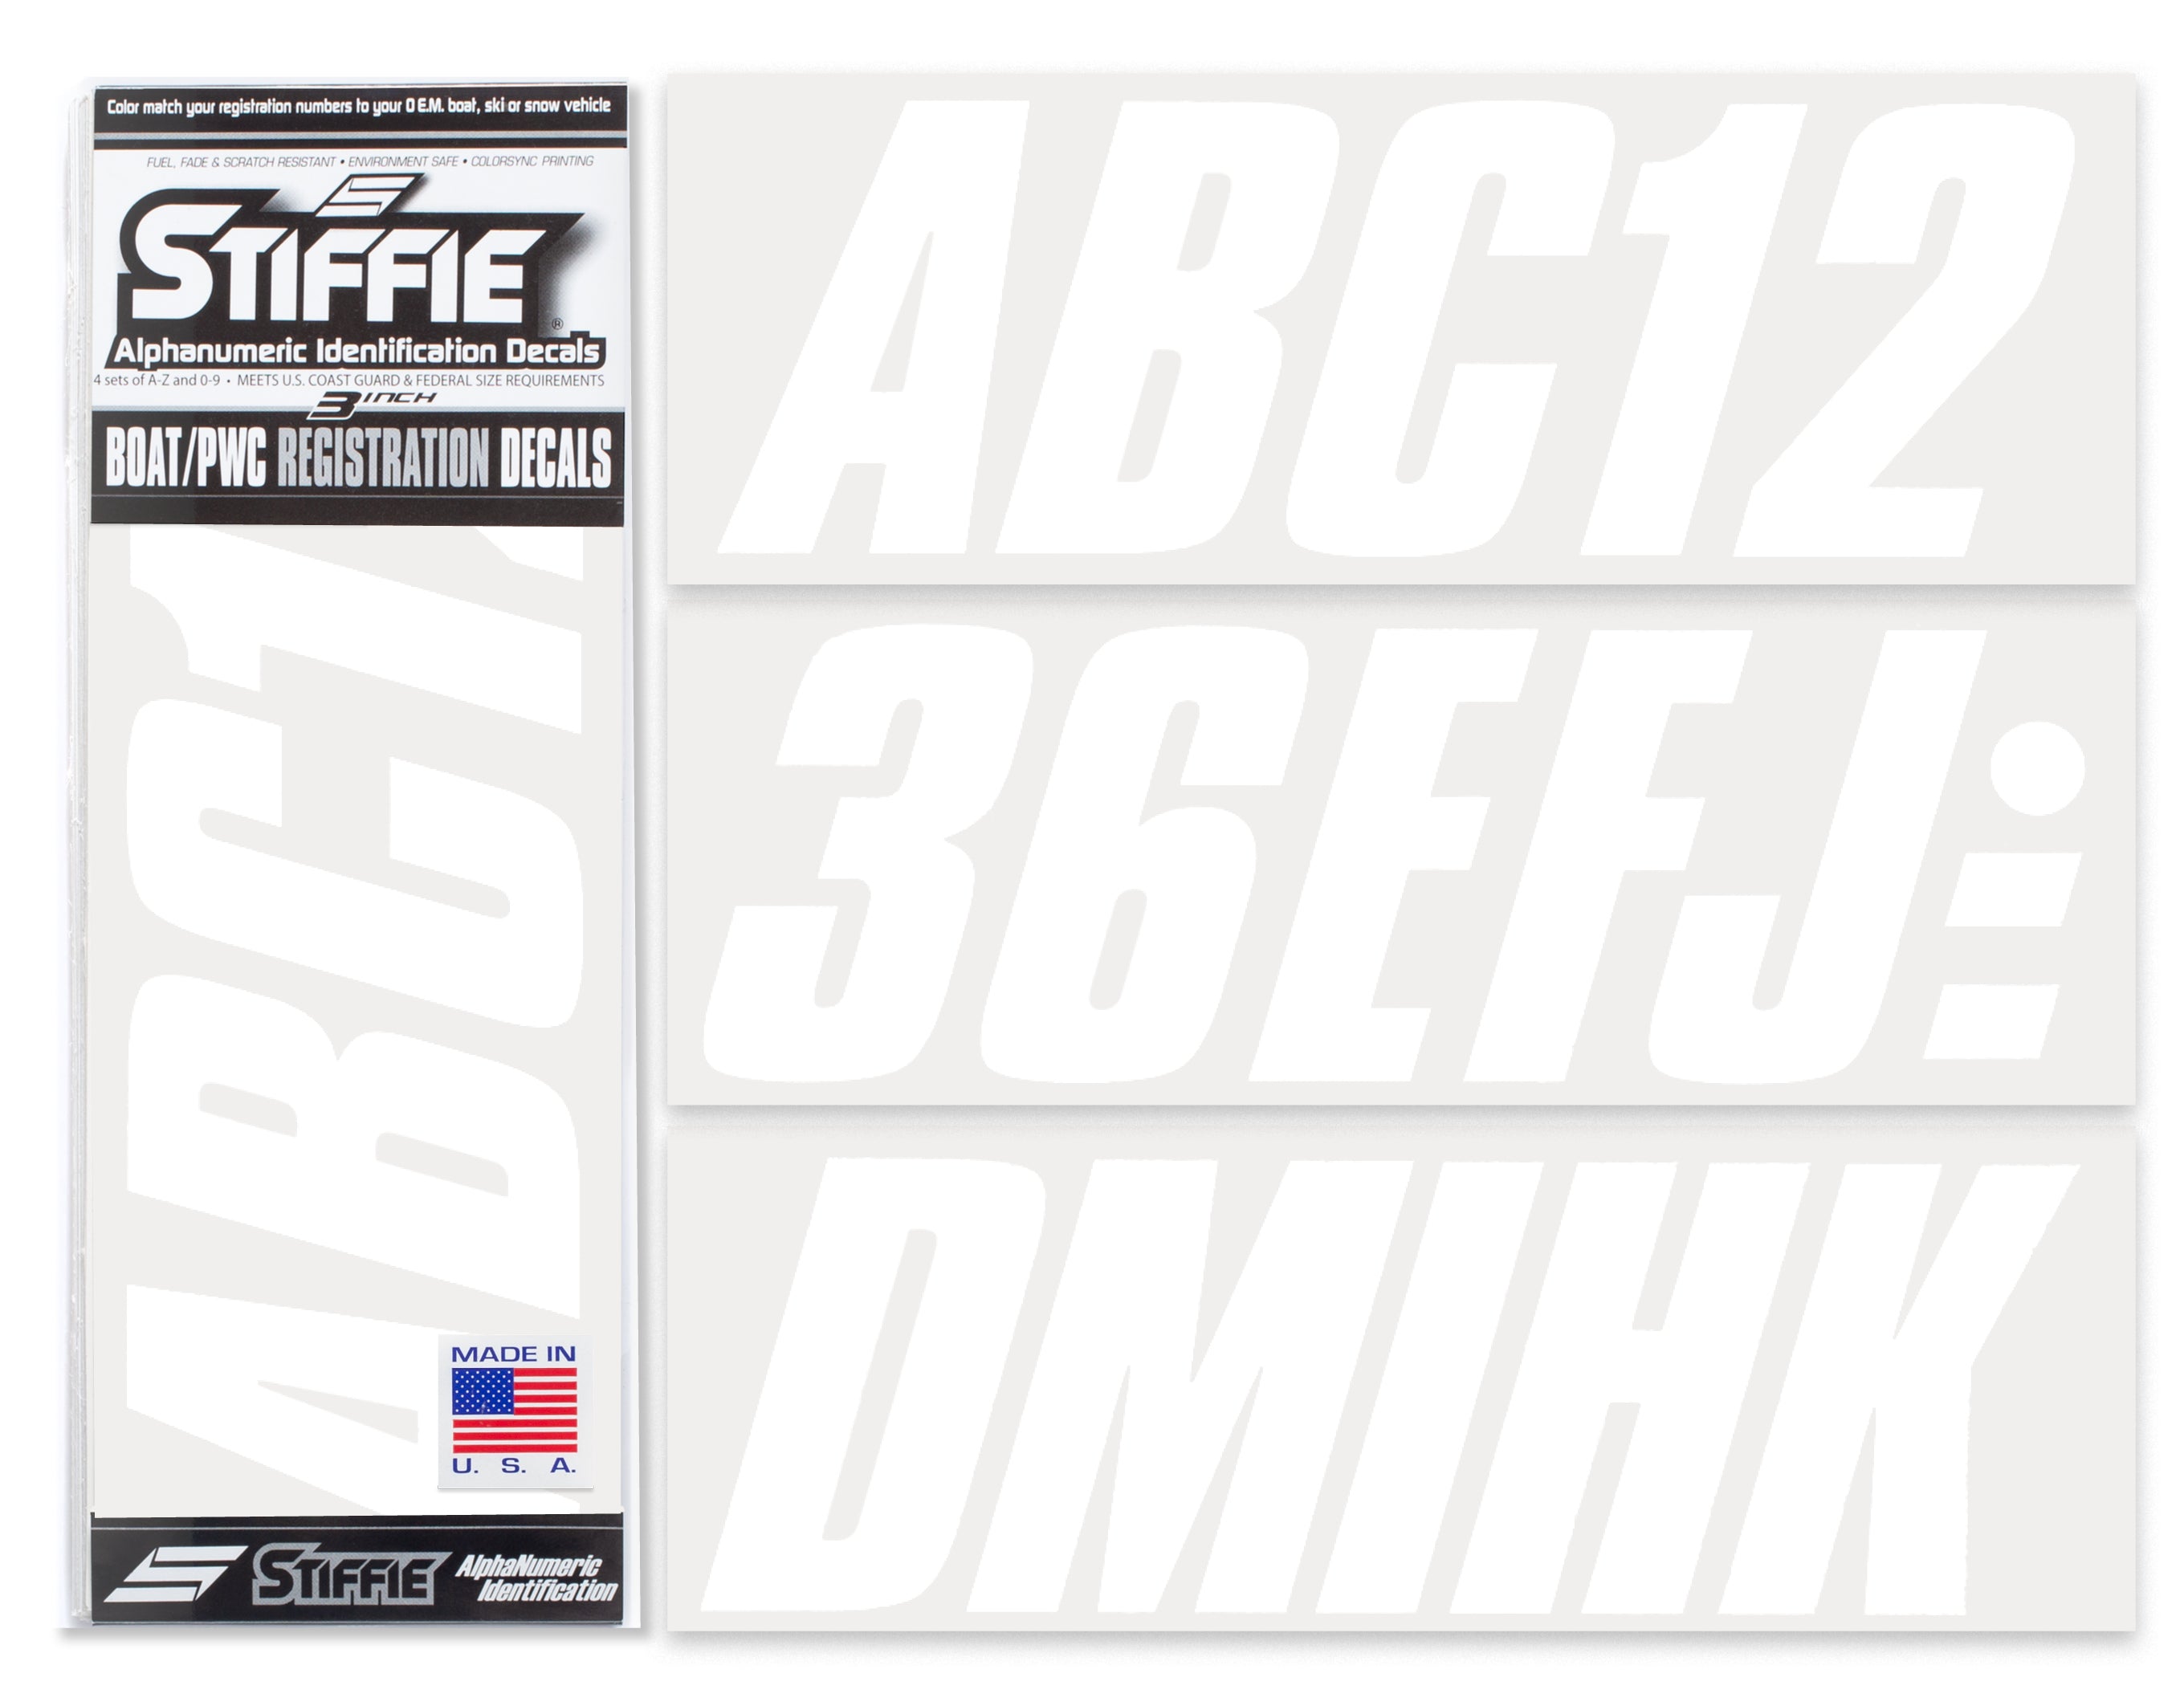 STIFFIE Shift White 3" ID Kit Alpha-Numeric Registration Identification Numbers Stickers Decals for Boats & Personal Watercraft